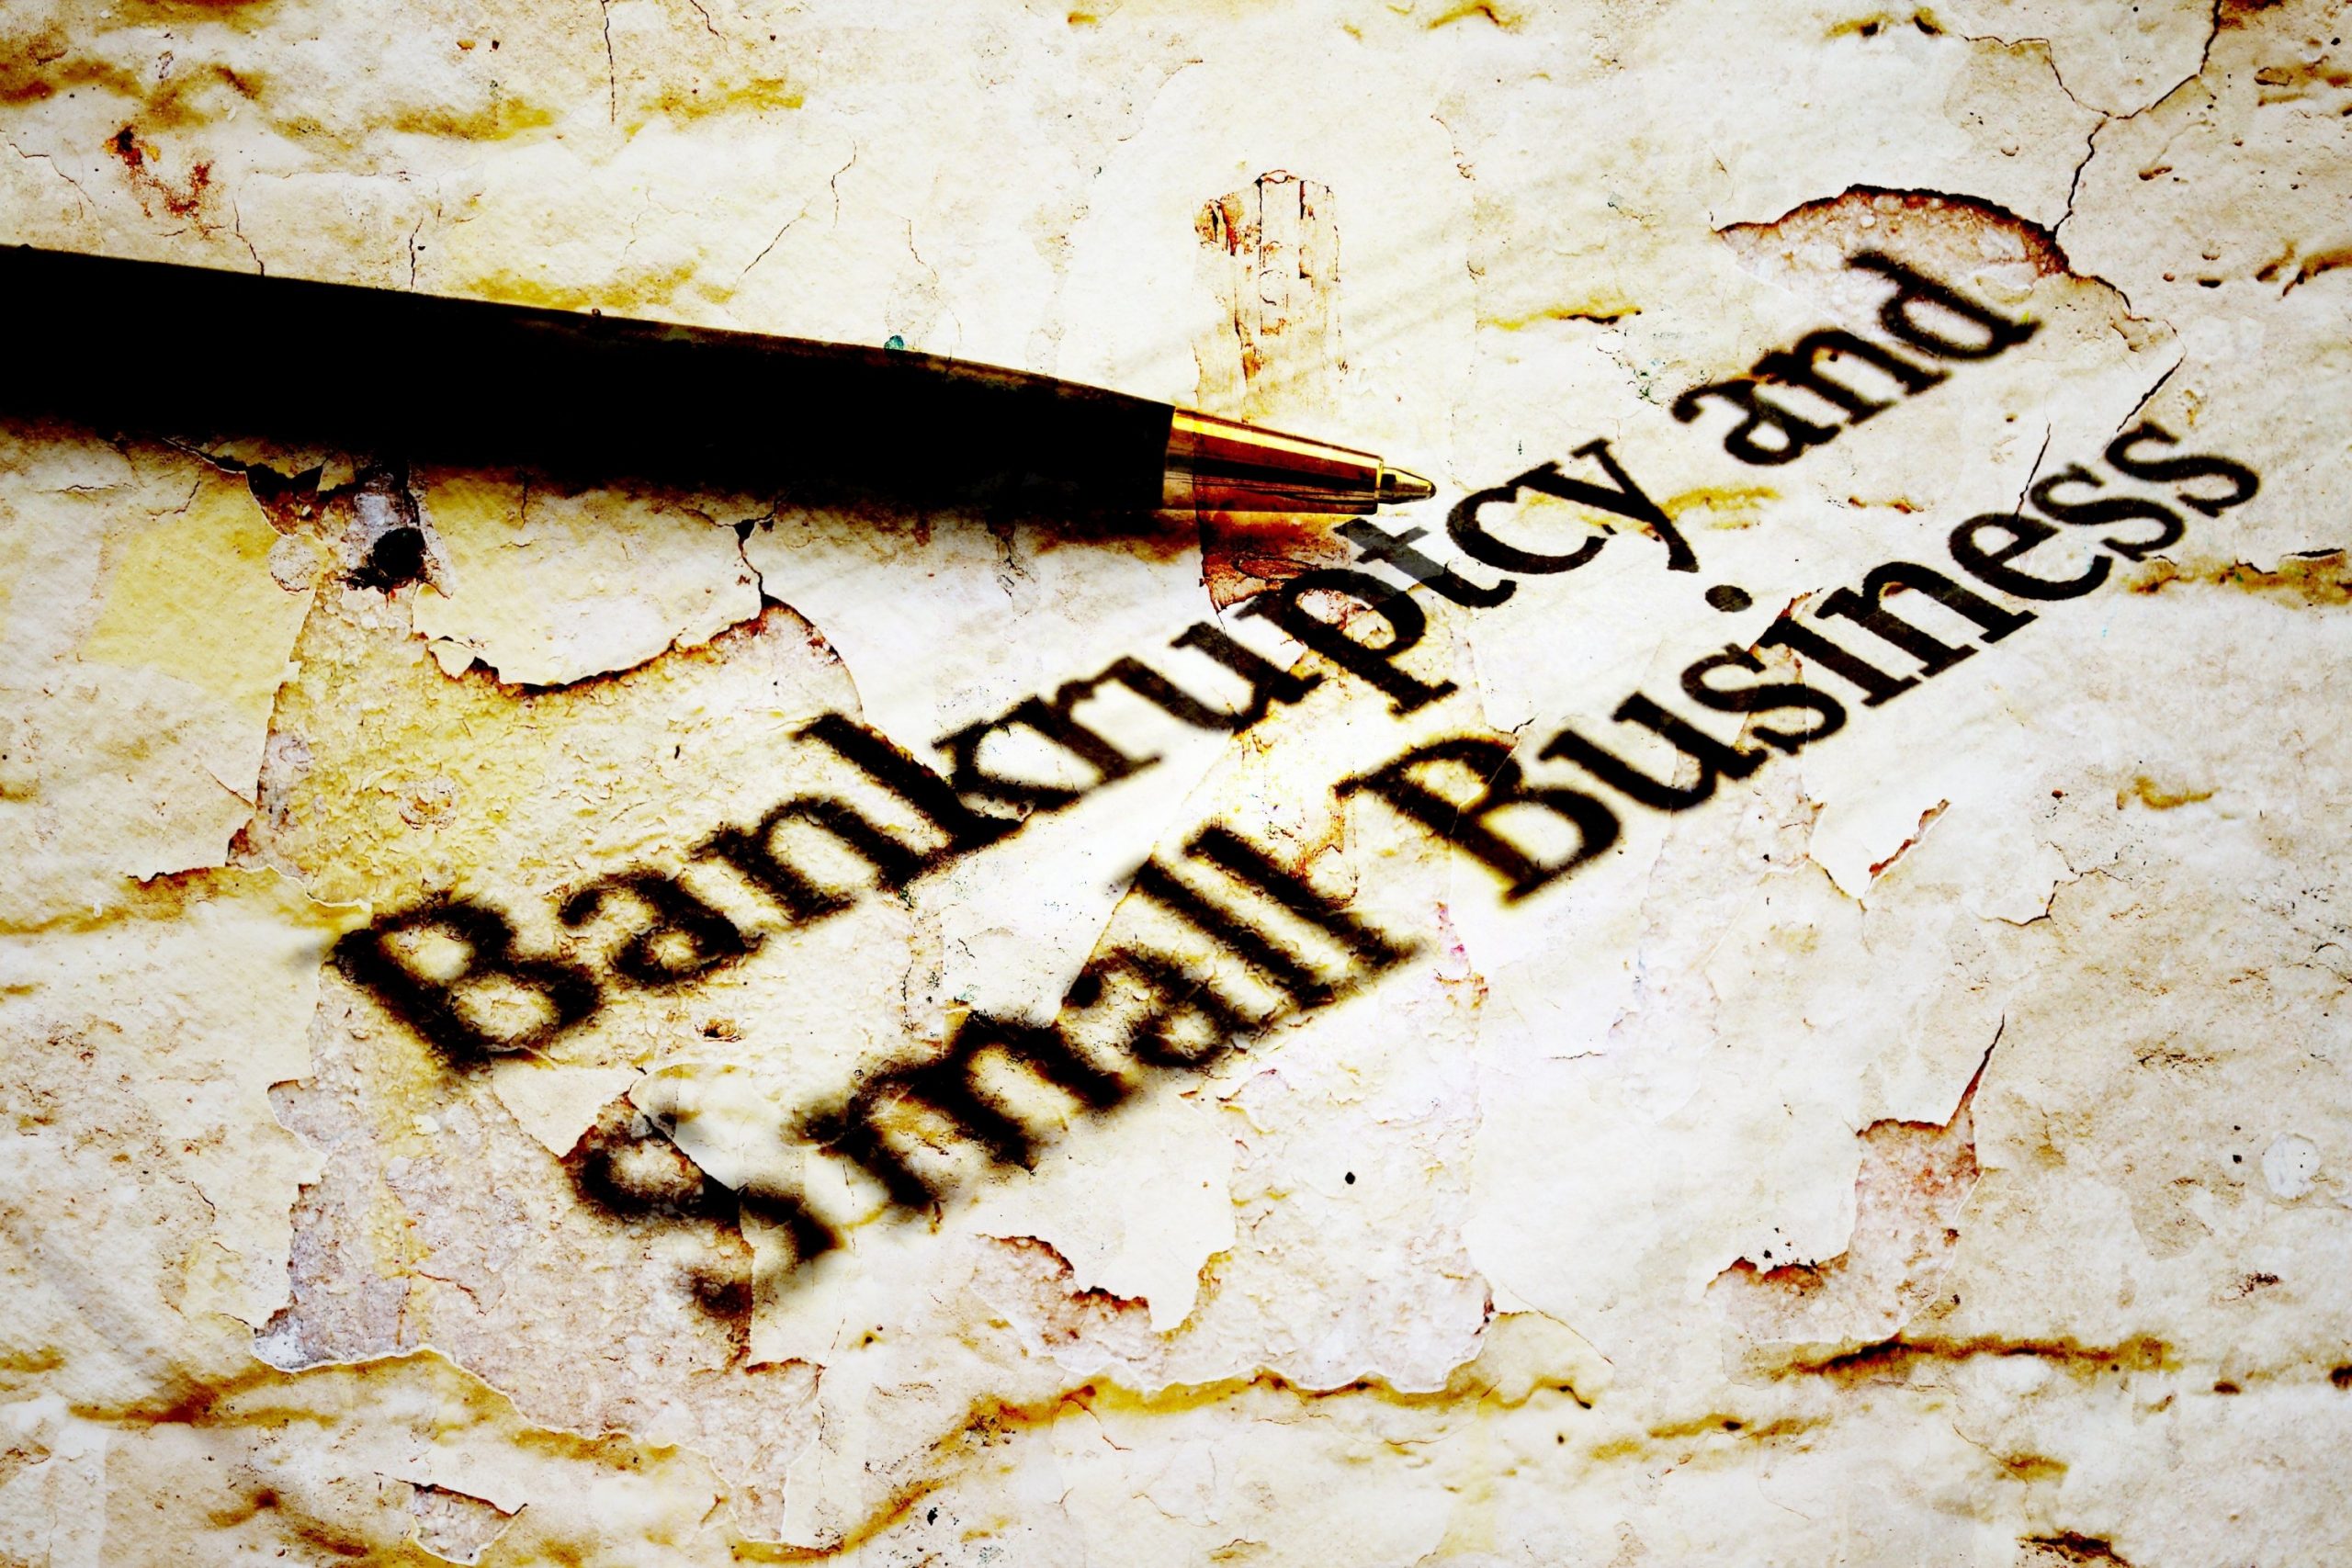 Bankruptcy and small businesses